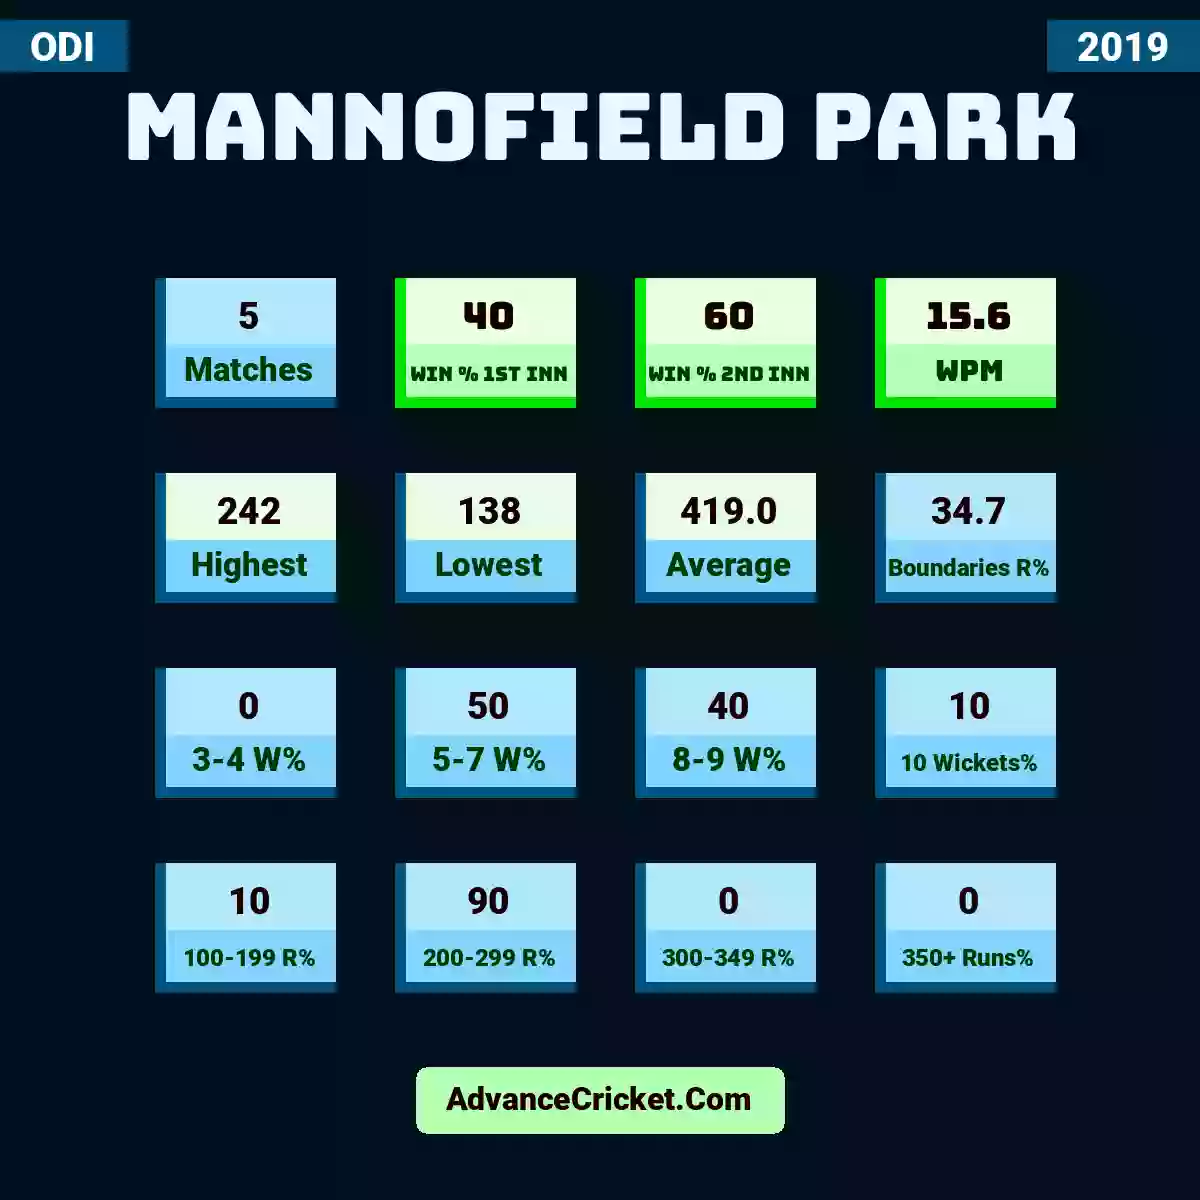 Image showing Mannofield Park with Matches: 5, Win % 1st Inn: 40, Win % 2nd Inn: 60, WPM: 15.6, Highest: 242, Lowest: 138, Average: 419.0, Boundaries R%: 34.7, 3-4 W%: 0, 5-7 W%: 50, 8-9 W%: 40, 10 Wickets%: 10, 100-199 R%: 10, 200-299 R%: 90, 300-349 R%: 0, 350+ Runs%: 0.